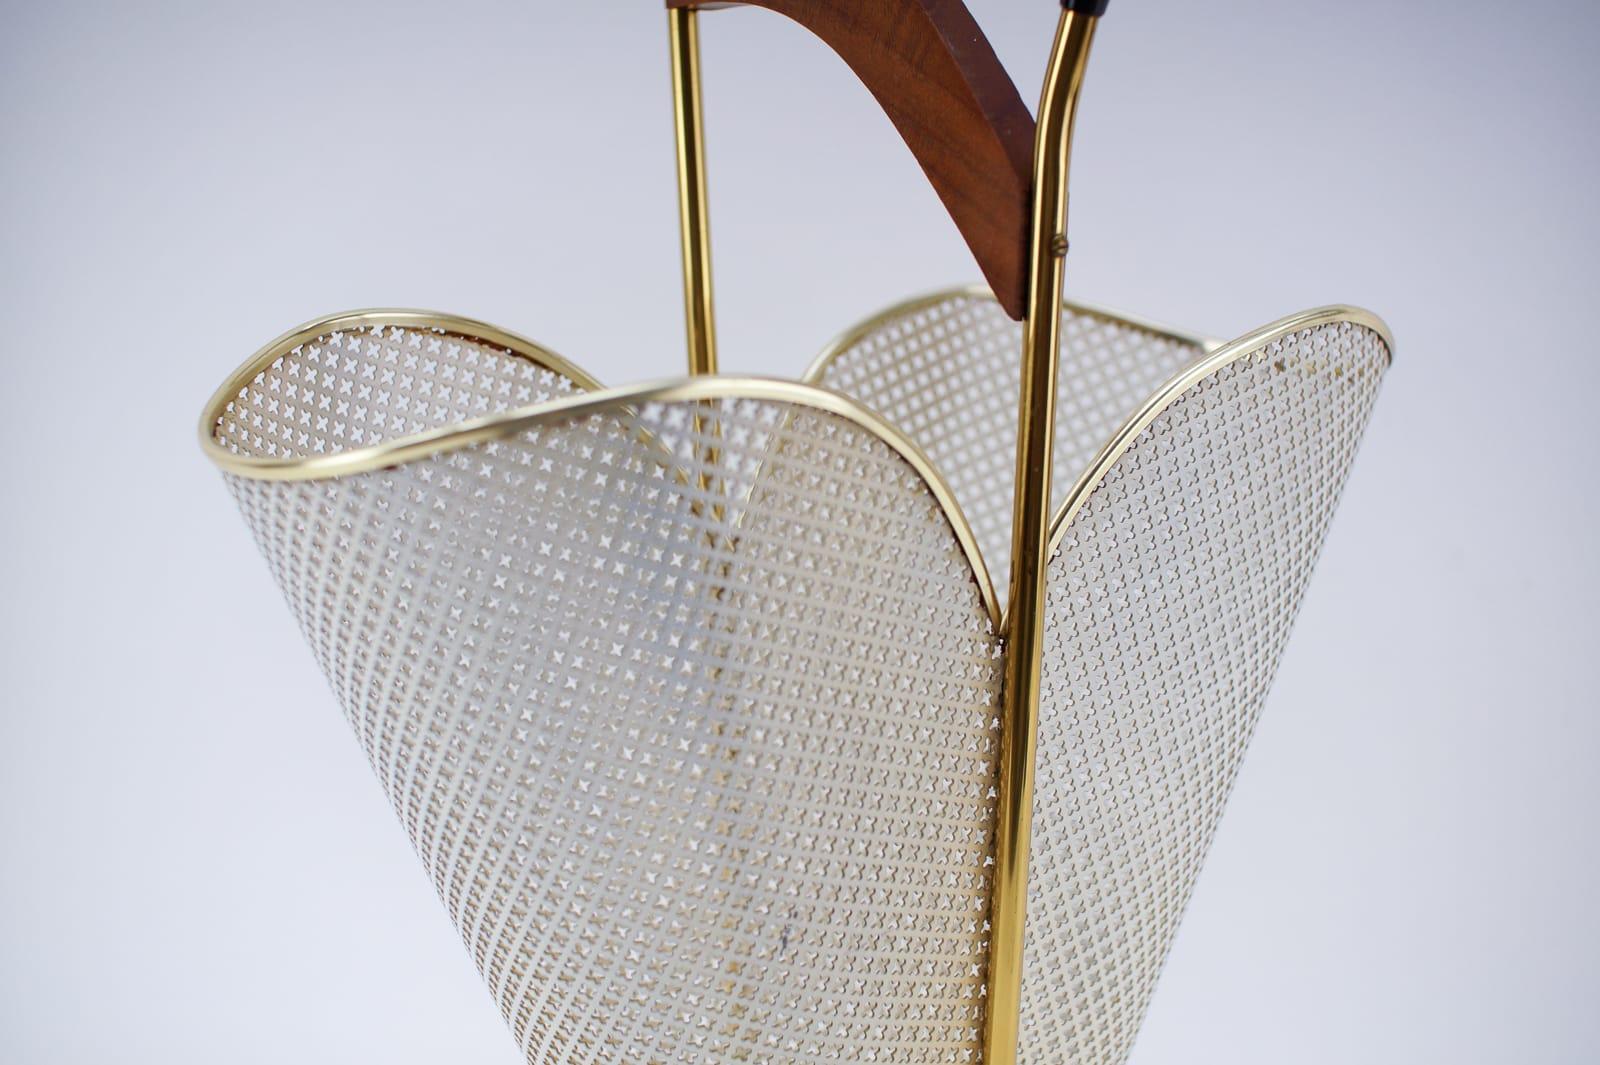 Mid-20th Century Perforated Mid-Century Modern Umbrella Stand Made in Metal Brass and Wood For Sale